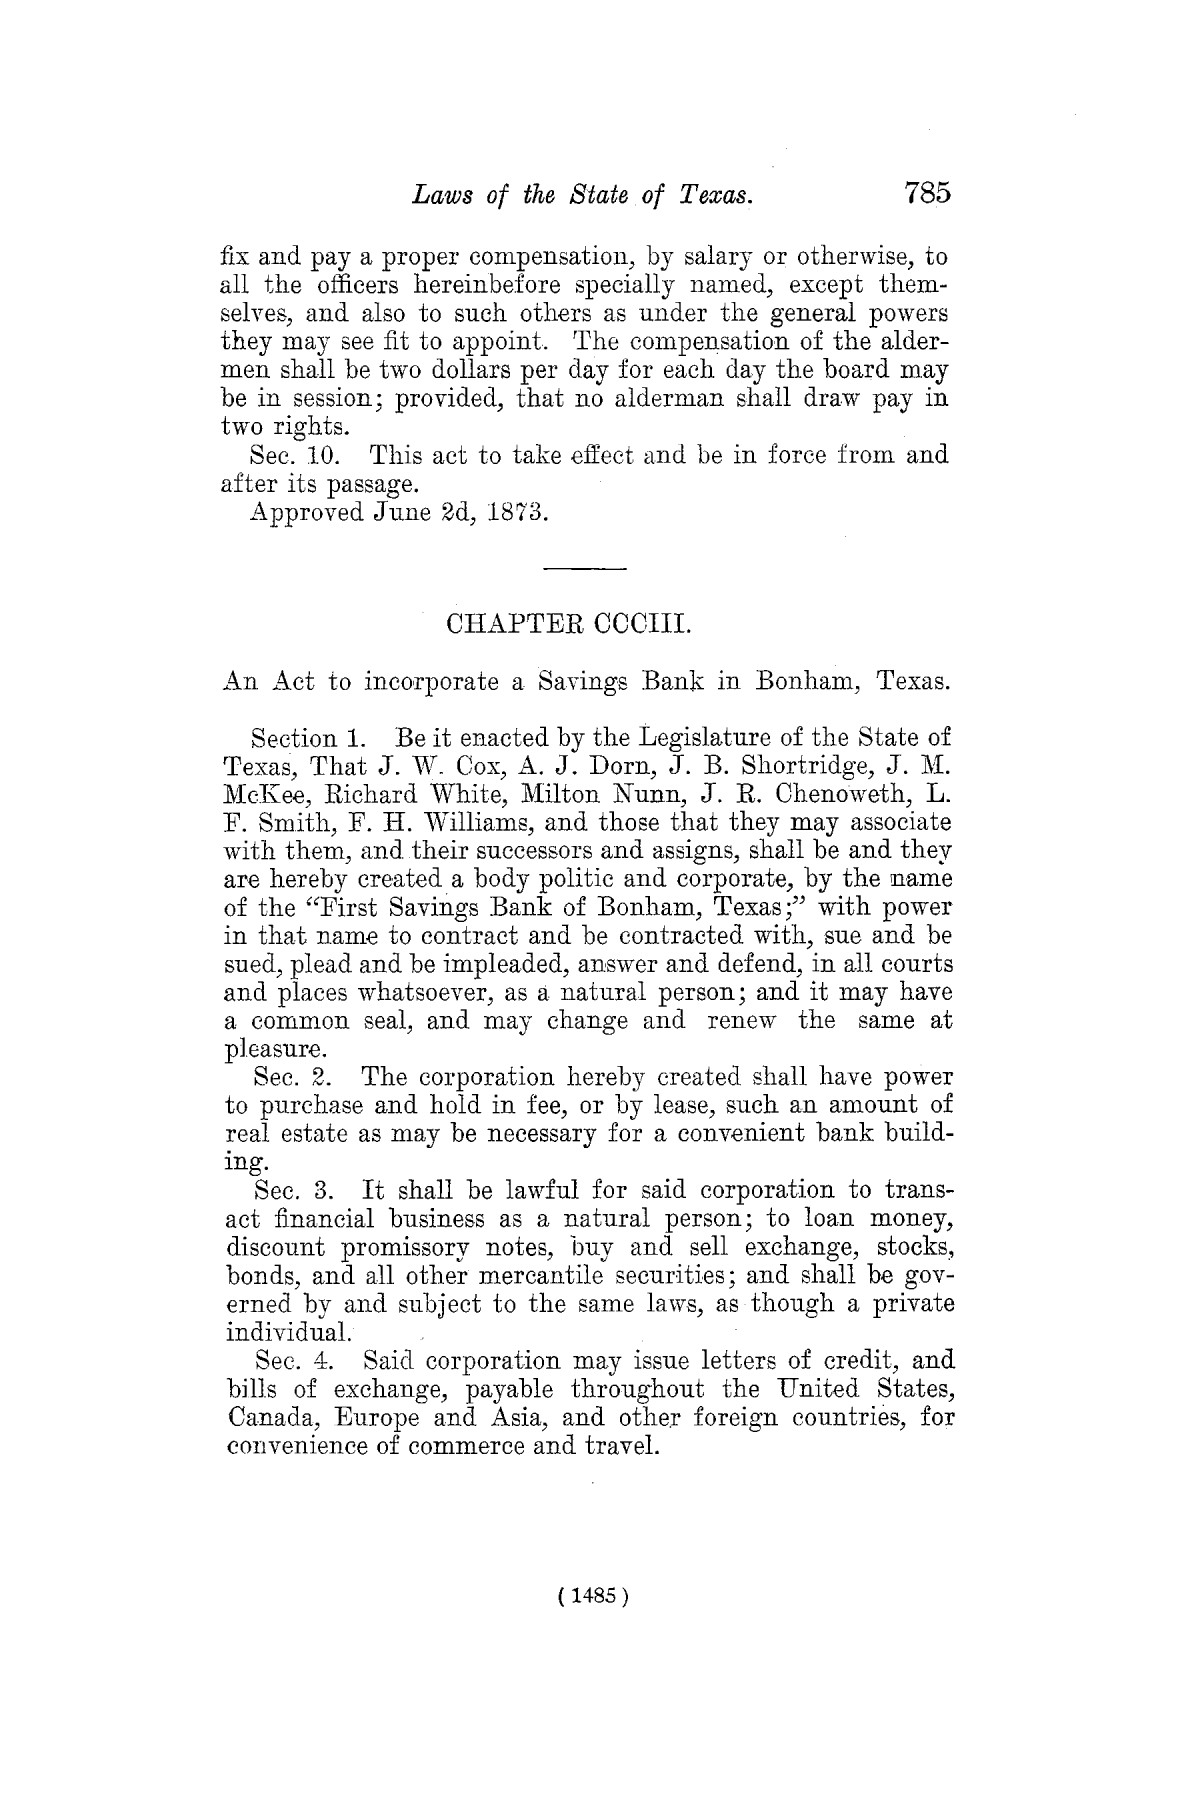 The Laws of Texas, 1822-1897 Volume 7
                                                
                                                    1485
                                                